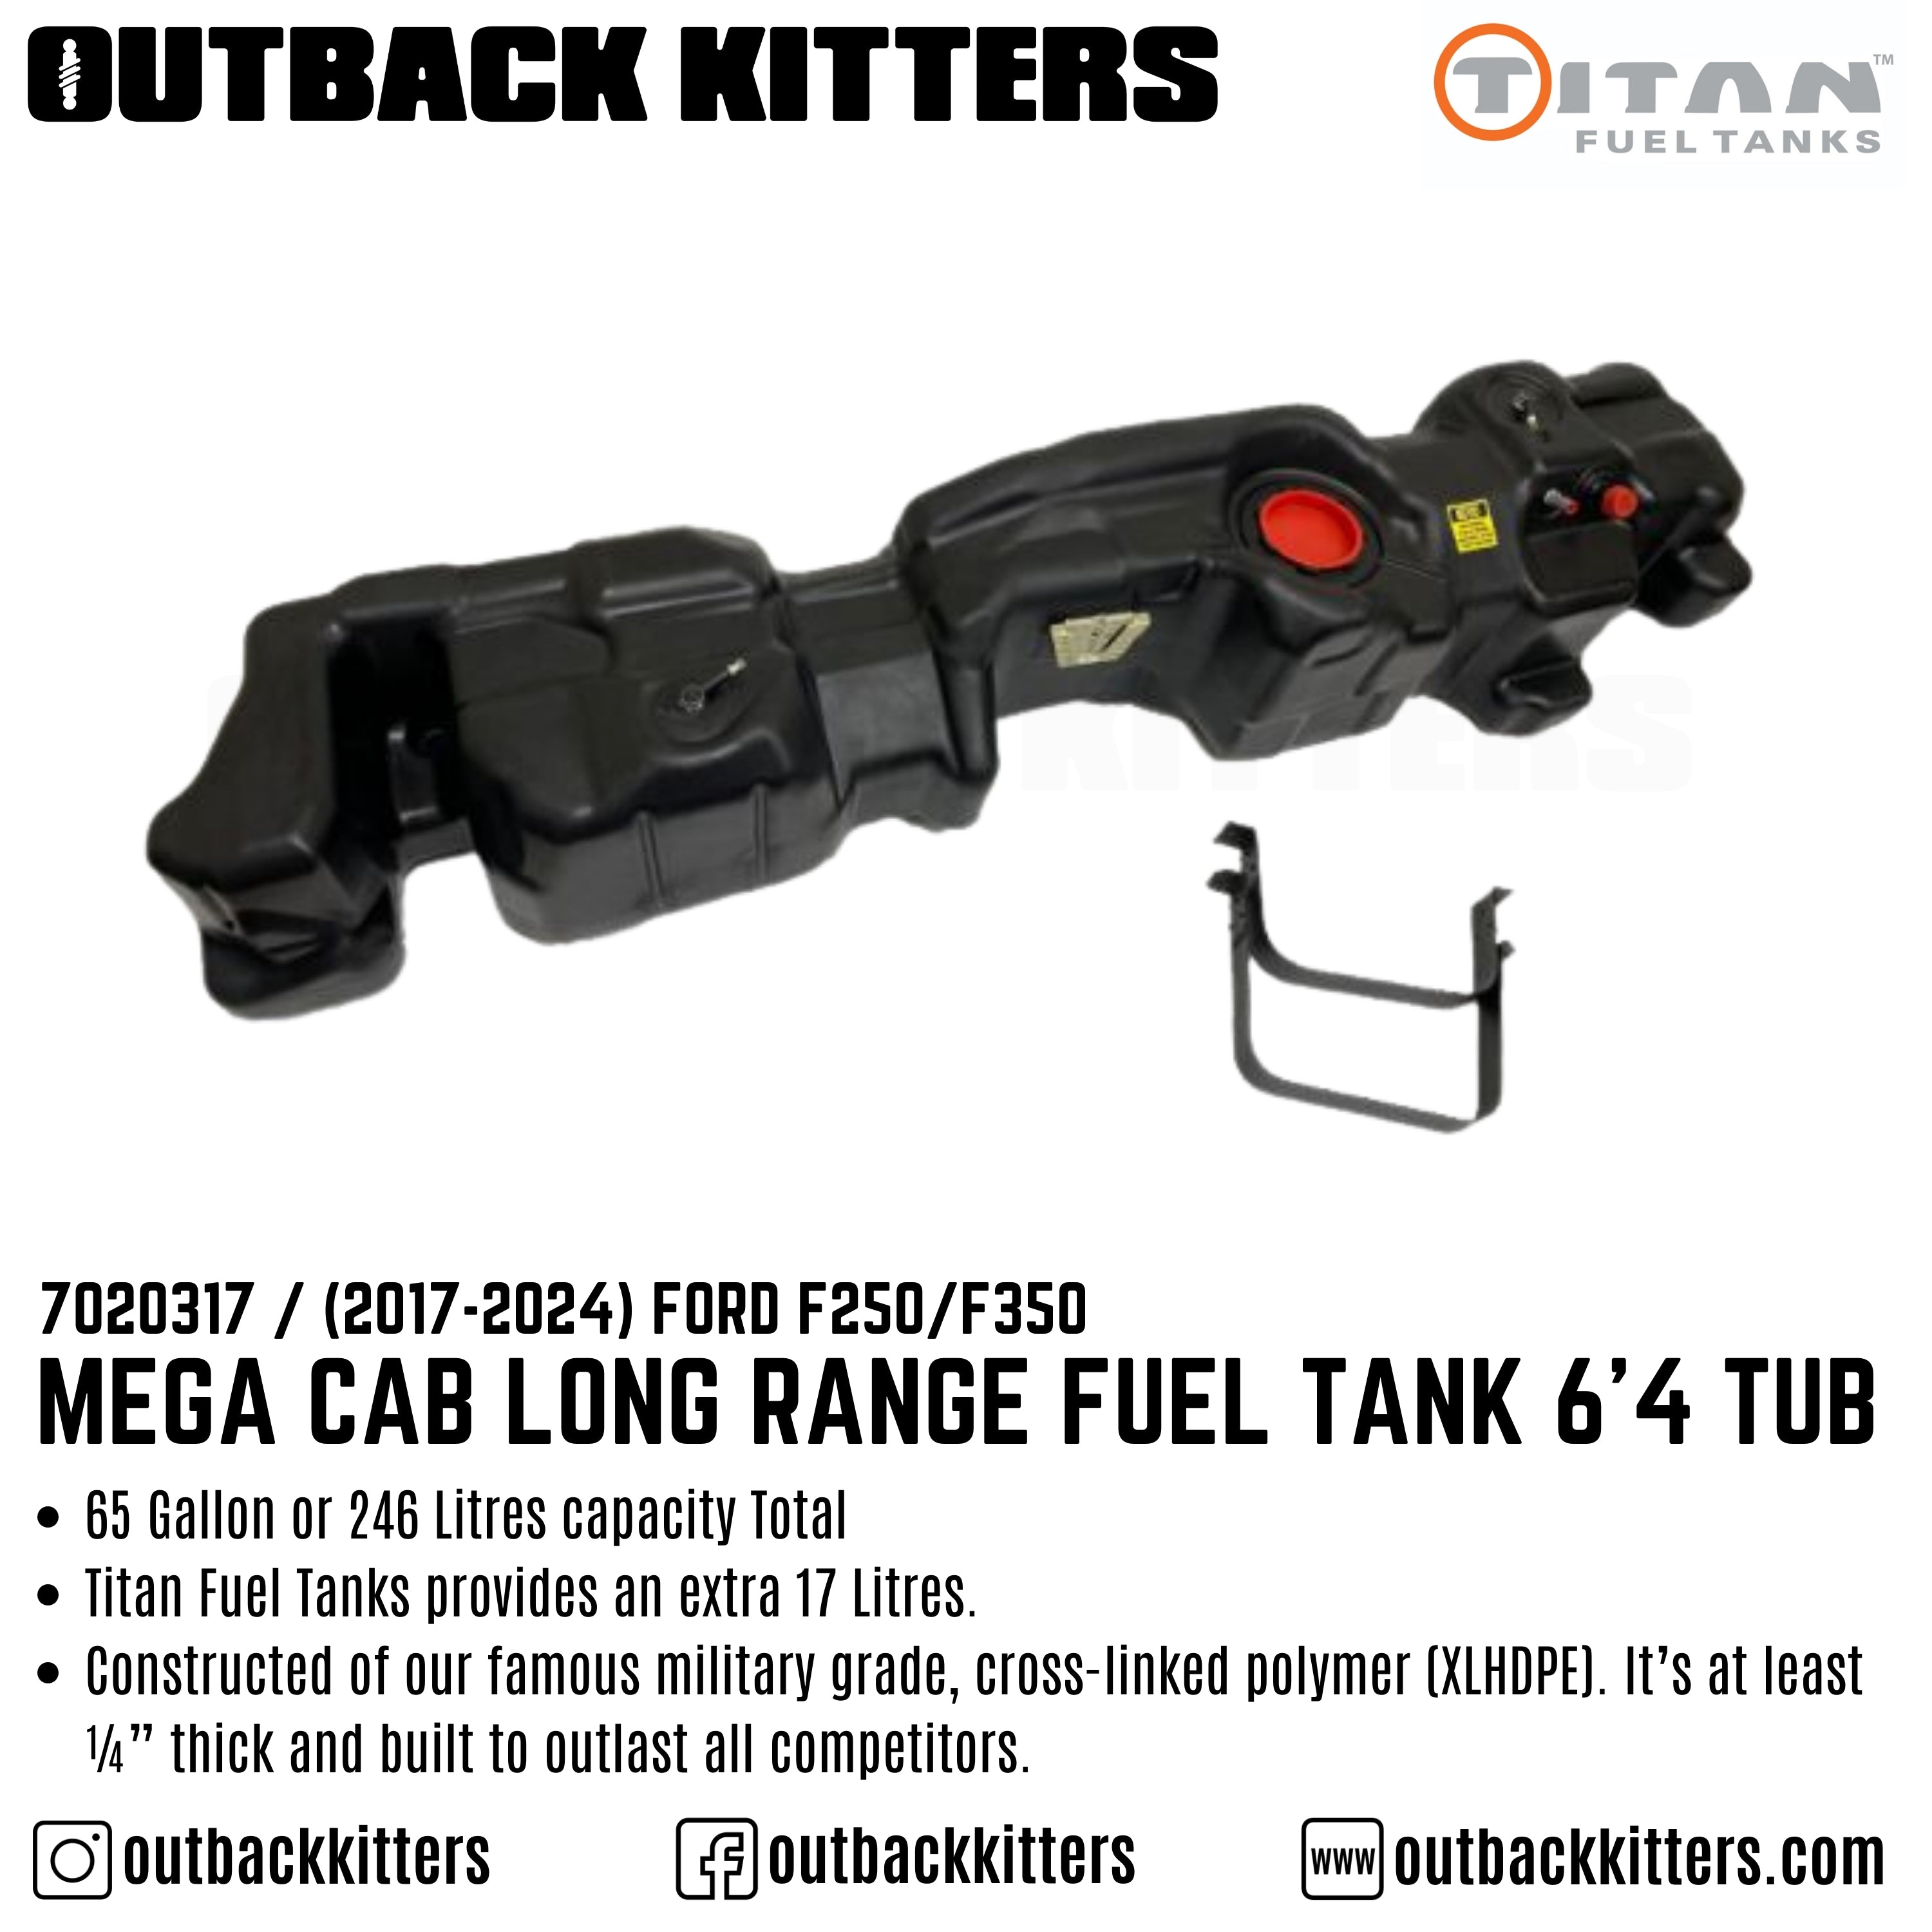 2017+ Ford F250/F350/F450 Crew Cab Long Range Fuel Tank, 8' Tub - Outback Kitters